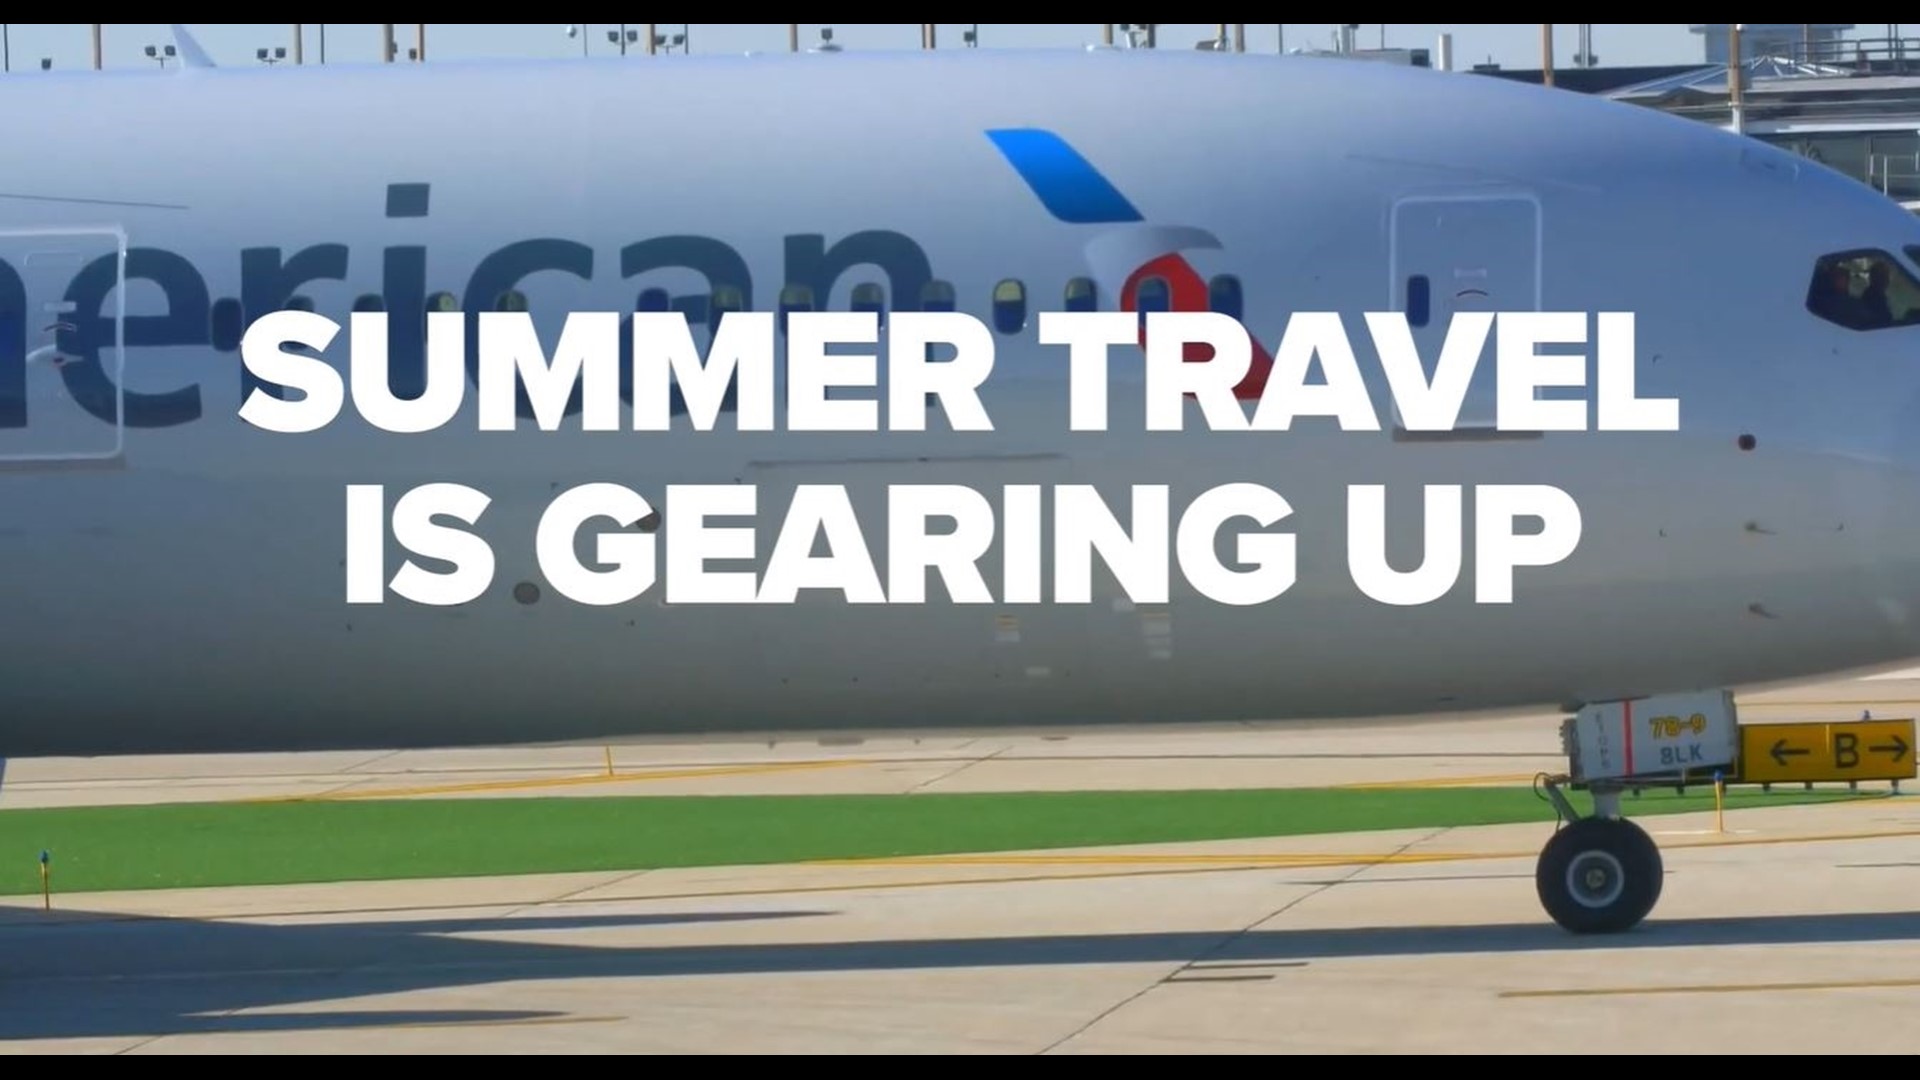 As summer travel kicks off with Memorial Day weekend, here's some tips from AAA on how to best plan and save on travel in the months ahead